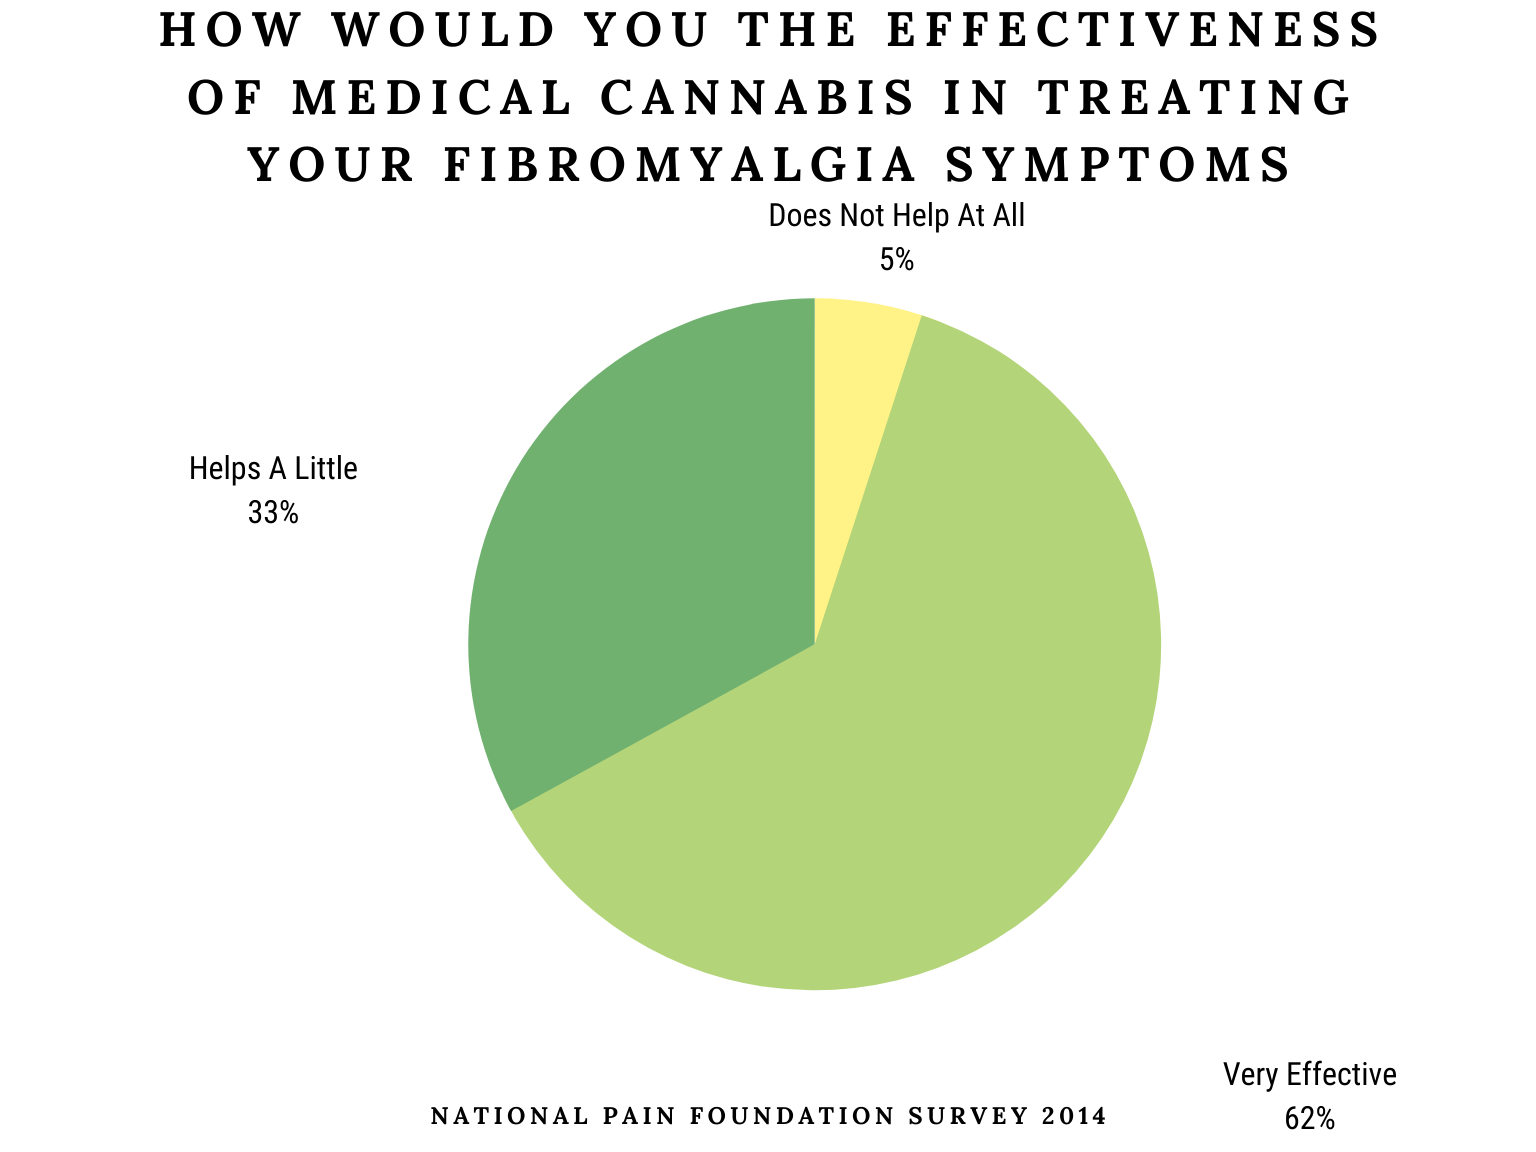 How Would You The Effectiveness Of medical cannabis In Treating Your Fibromyalgia Symptoms